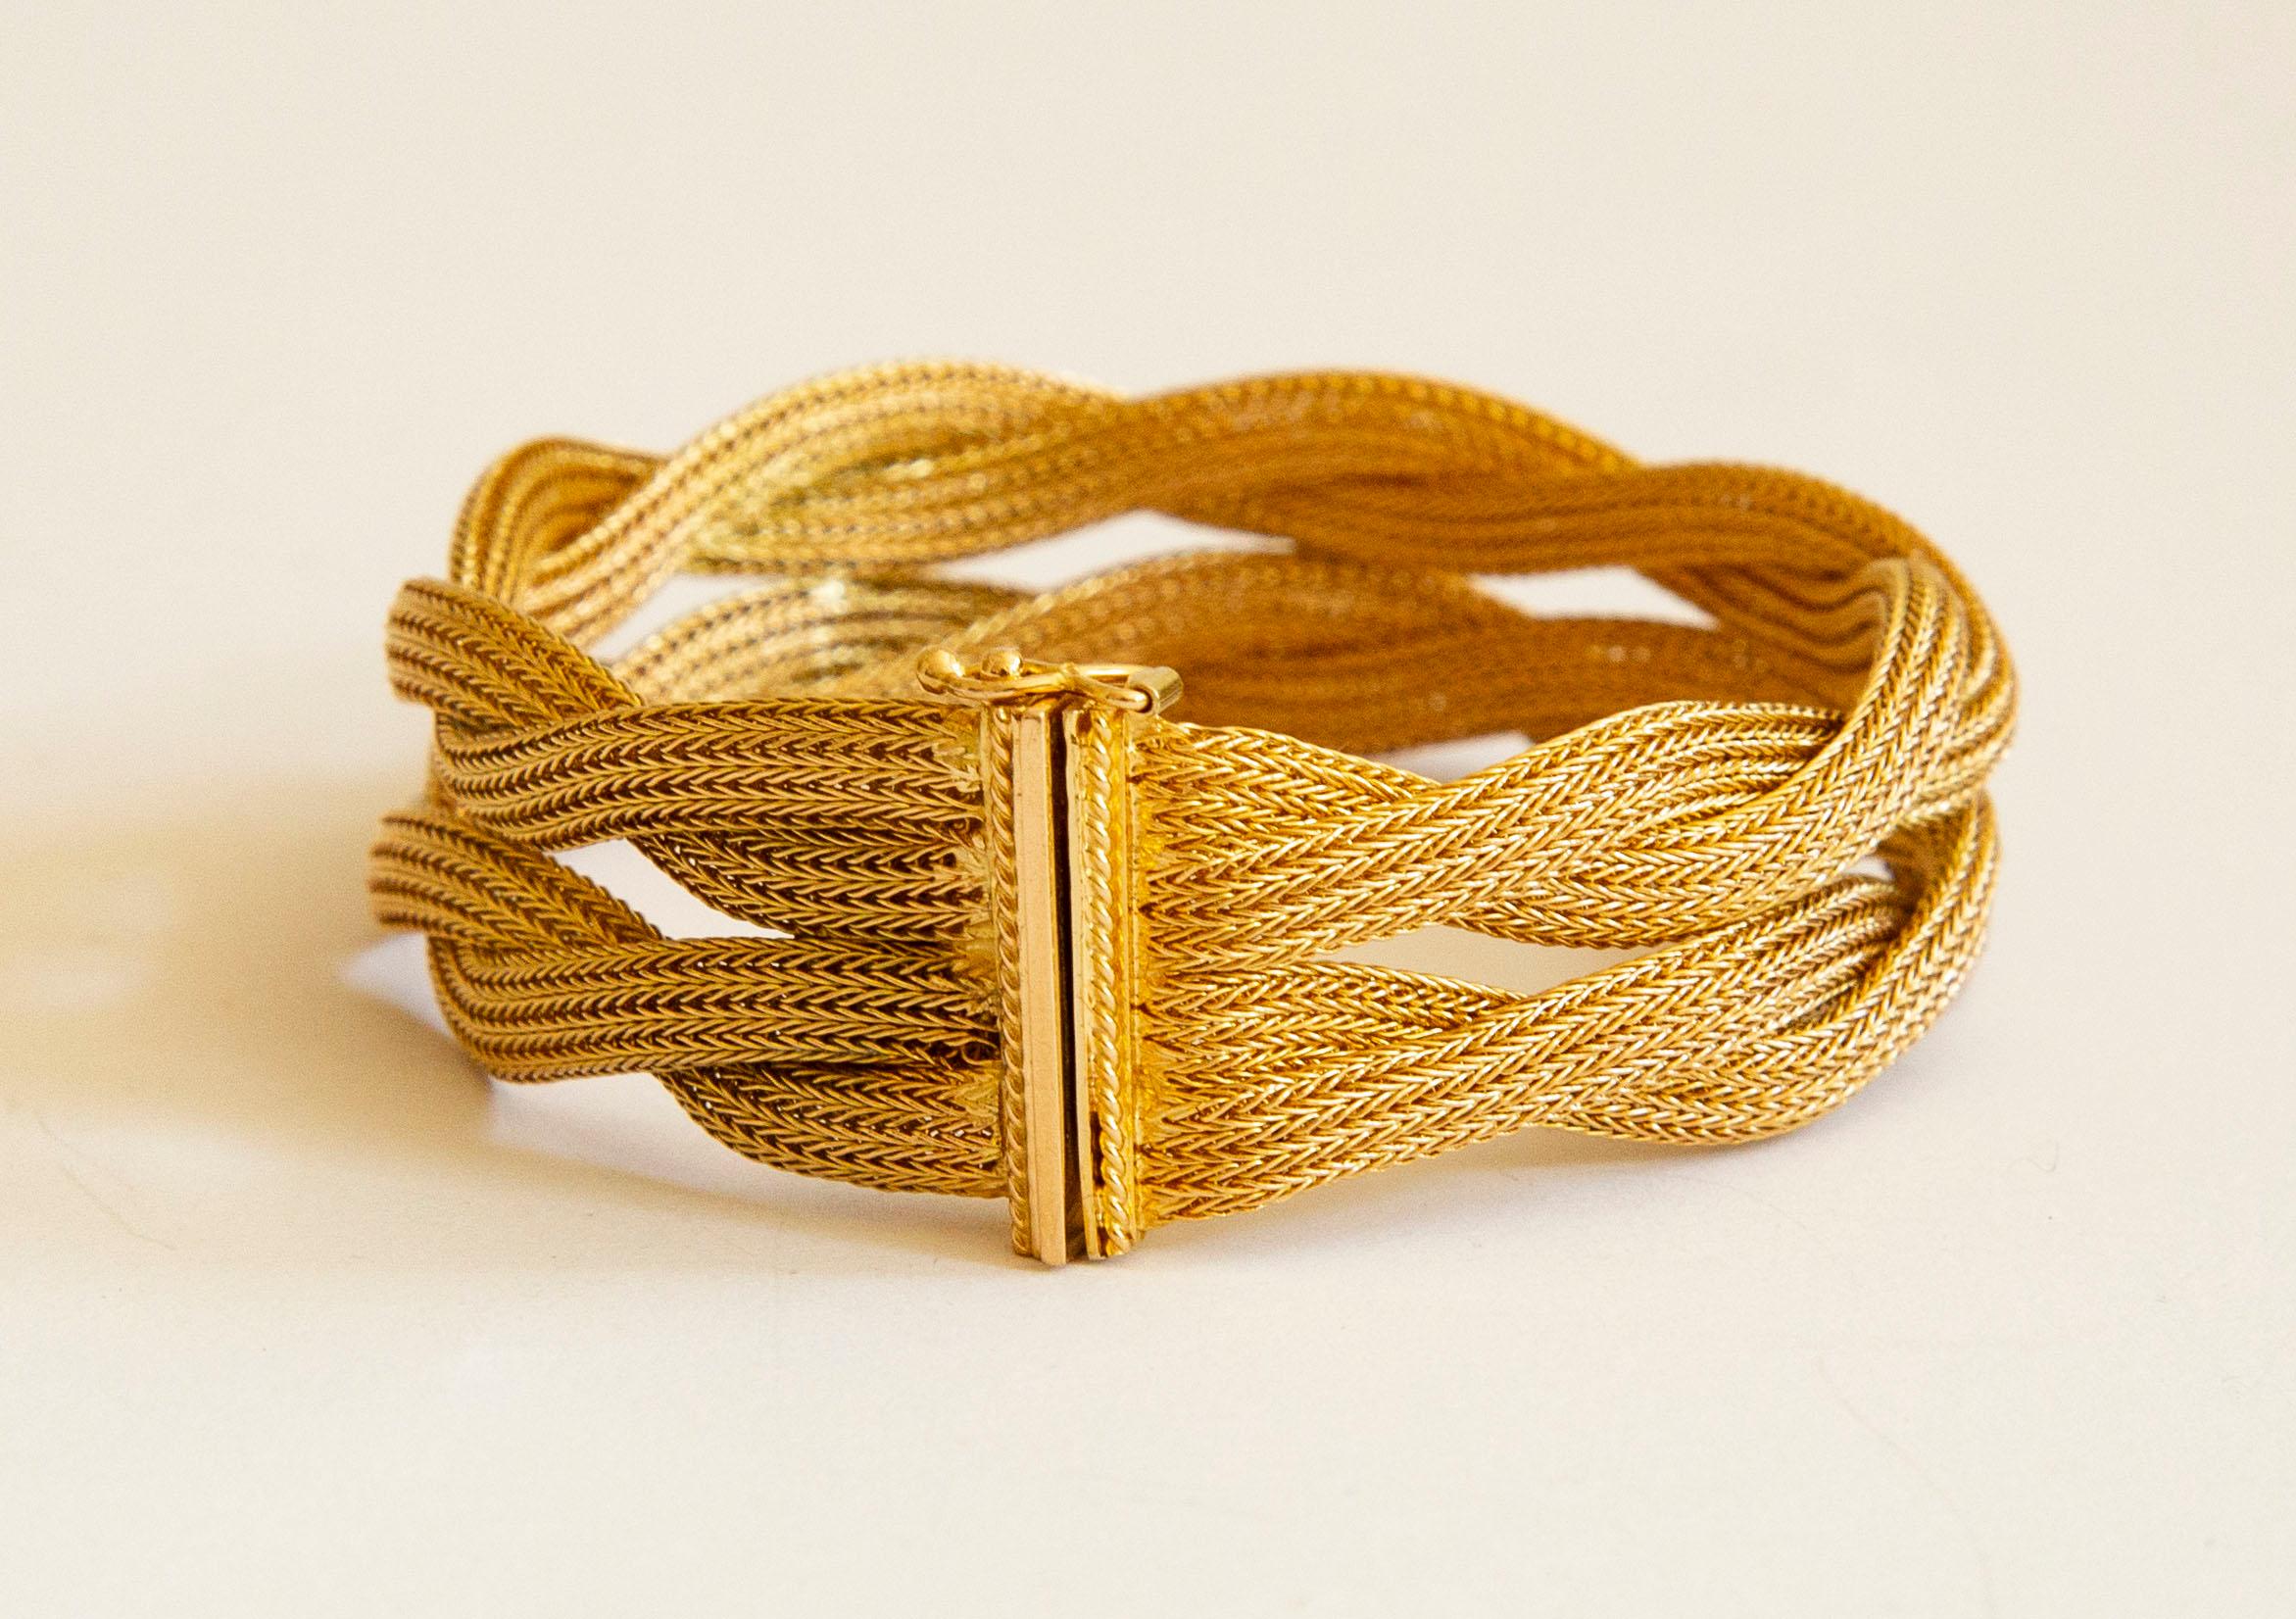 A vintage 18 karat /750 yellow gold bracelet. The bracelet was created in the 1950s in Milaan,  Italy. The bracelet features two rows of delicate handmade mesh braids. It has an insert clasp and a figure eight safety lock.
This bracelet represents a